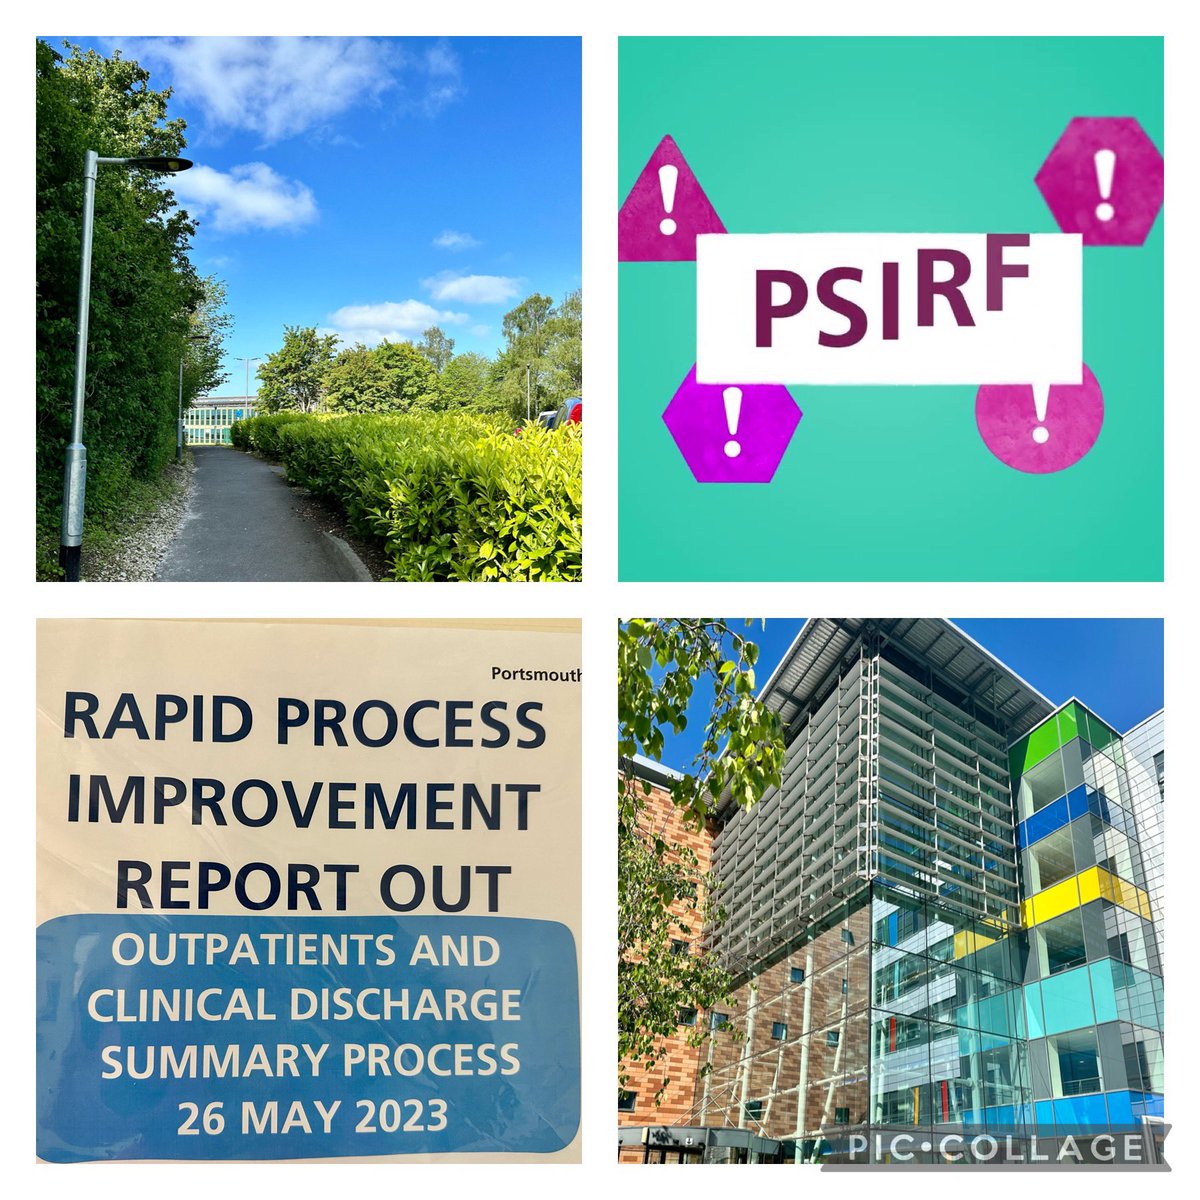 Such a positive, inspiring day today - morning with @SCAS999 helping with the development of their PSIRF implementation plans then an afternoon @PHU_NHS with @verandernltd and Quality Improvement report outs for discharge and planned care and PSIRF planning 🌟🌟🌟